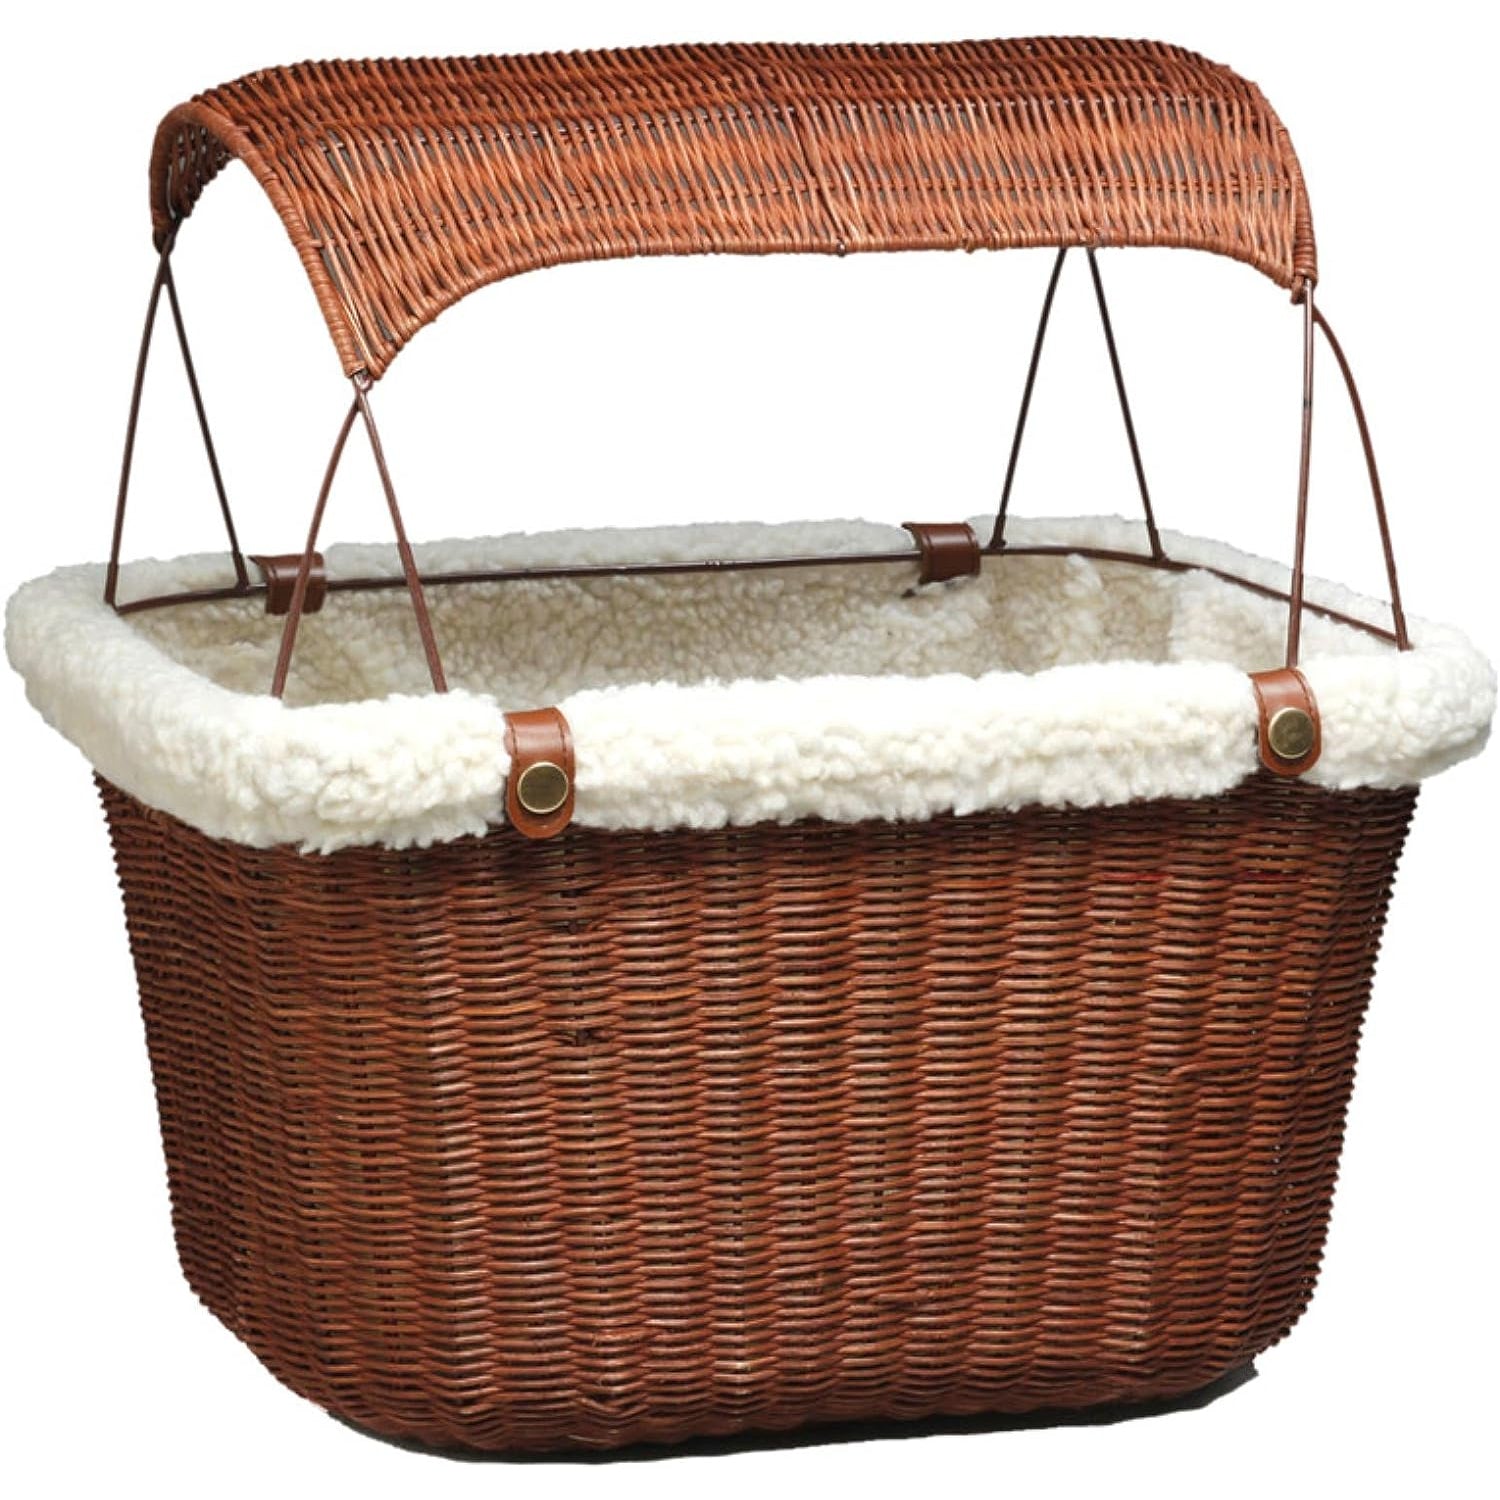 PetSafe Happy Ride Wicker Bicycle Basket for Dogs and Cats